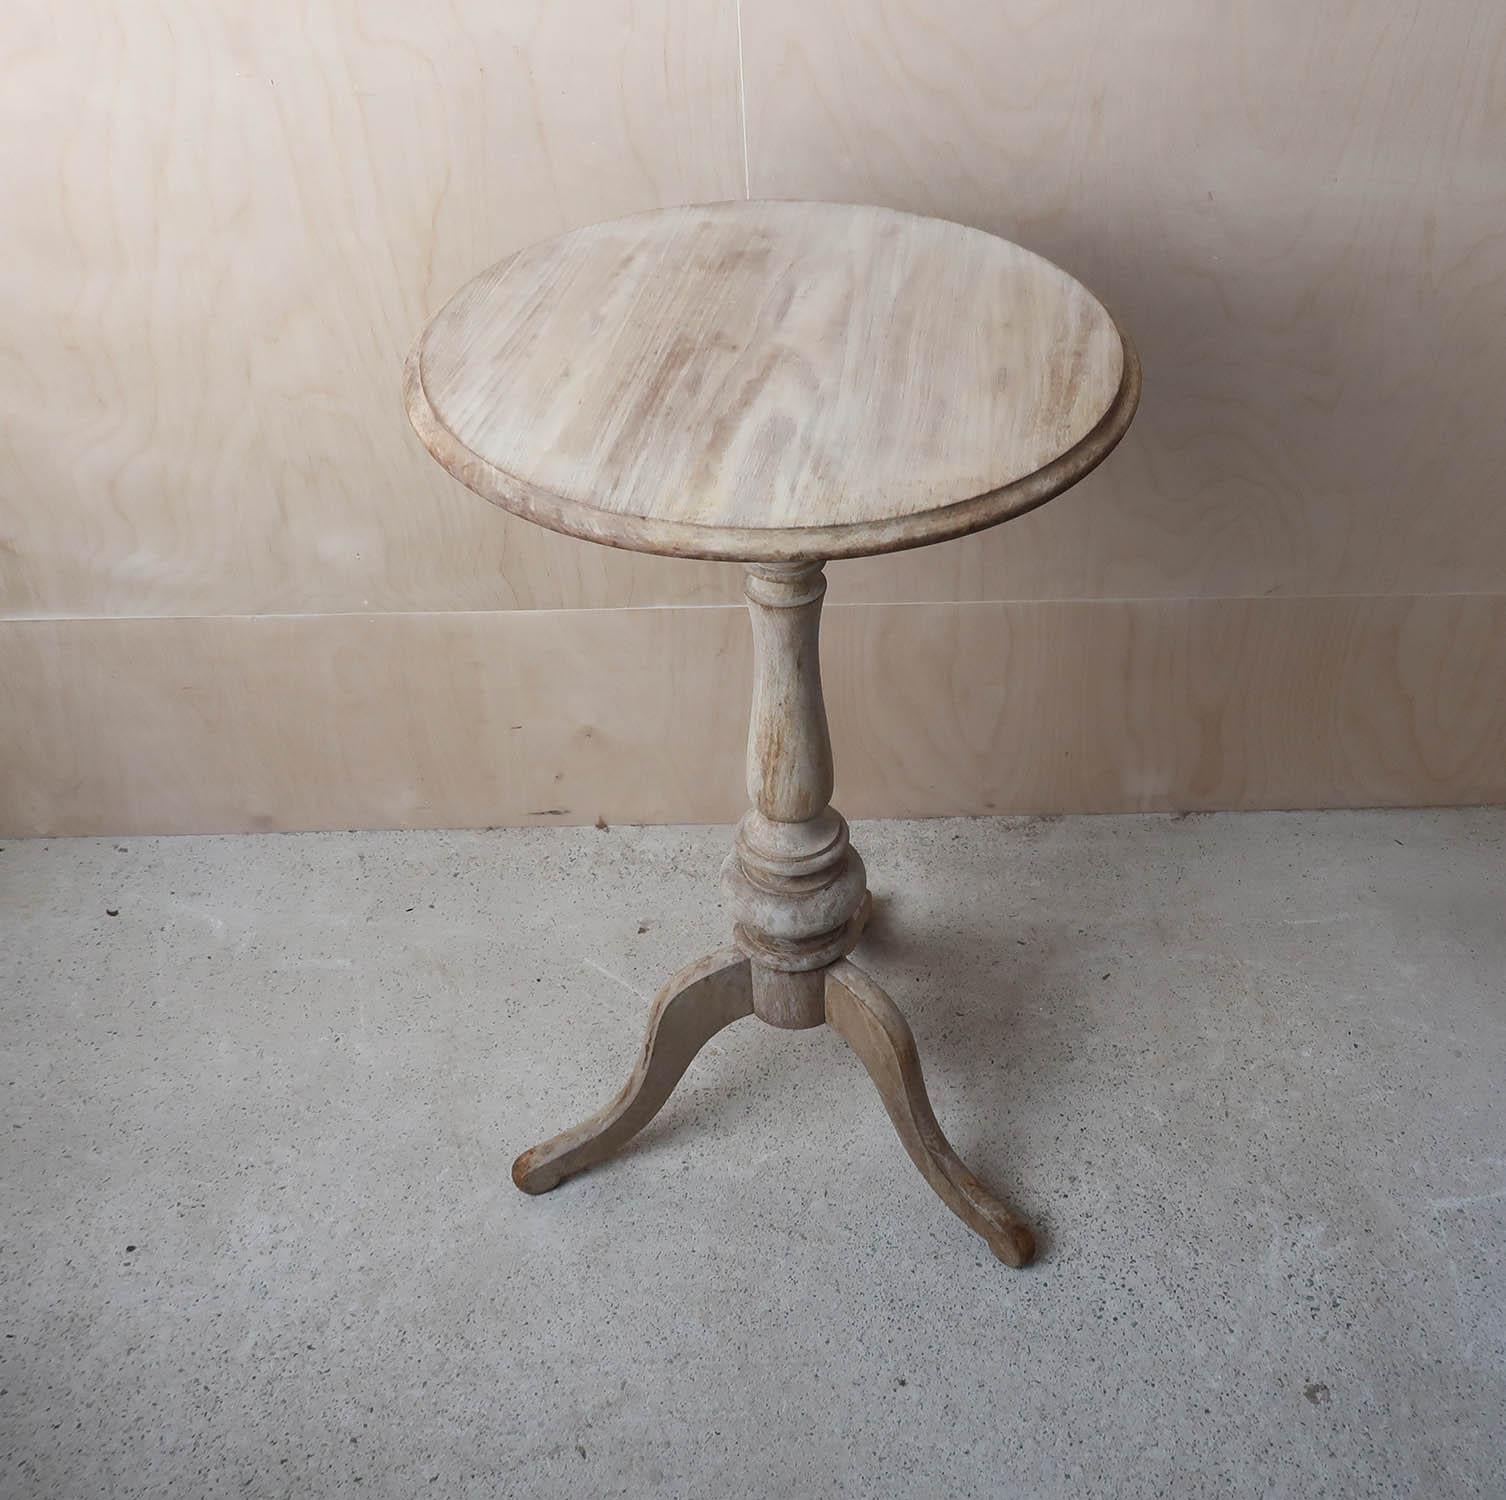 Wood Small Antique Gustavian Style Round Bleached Table, English, C.1850